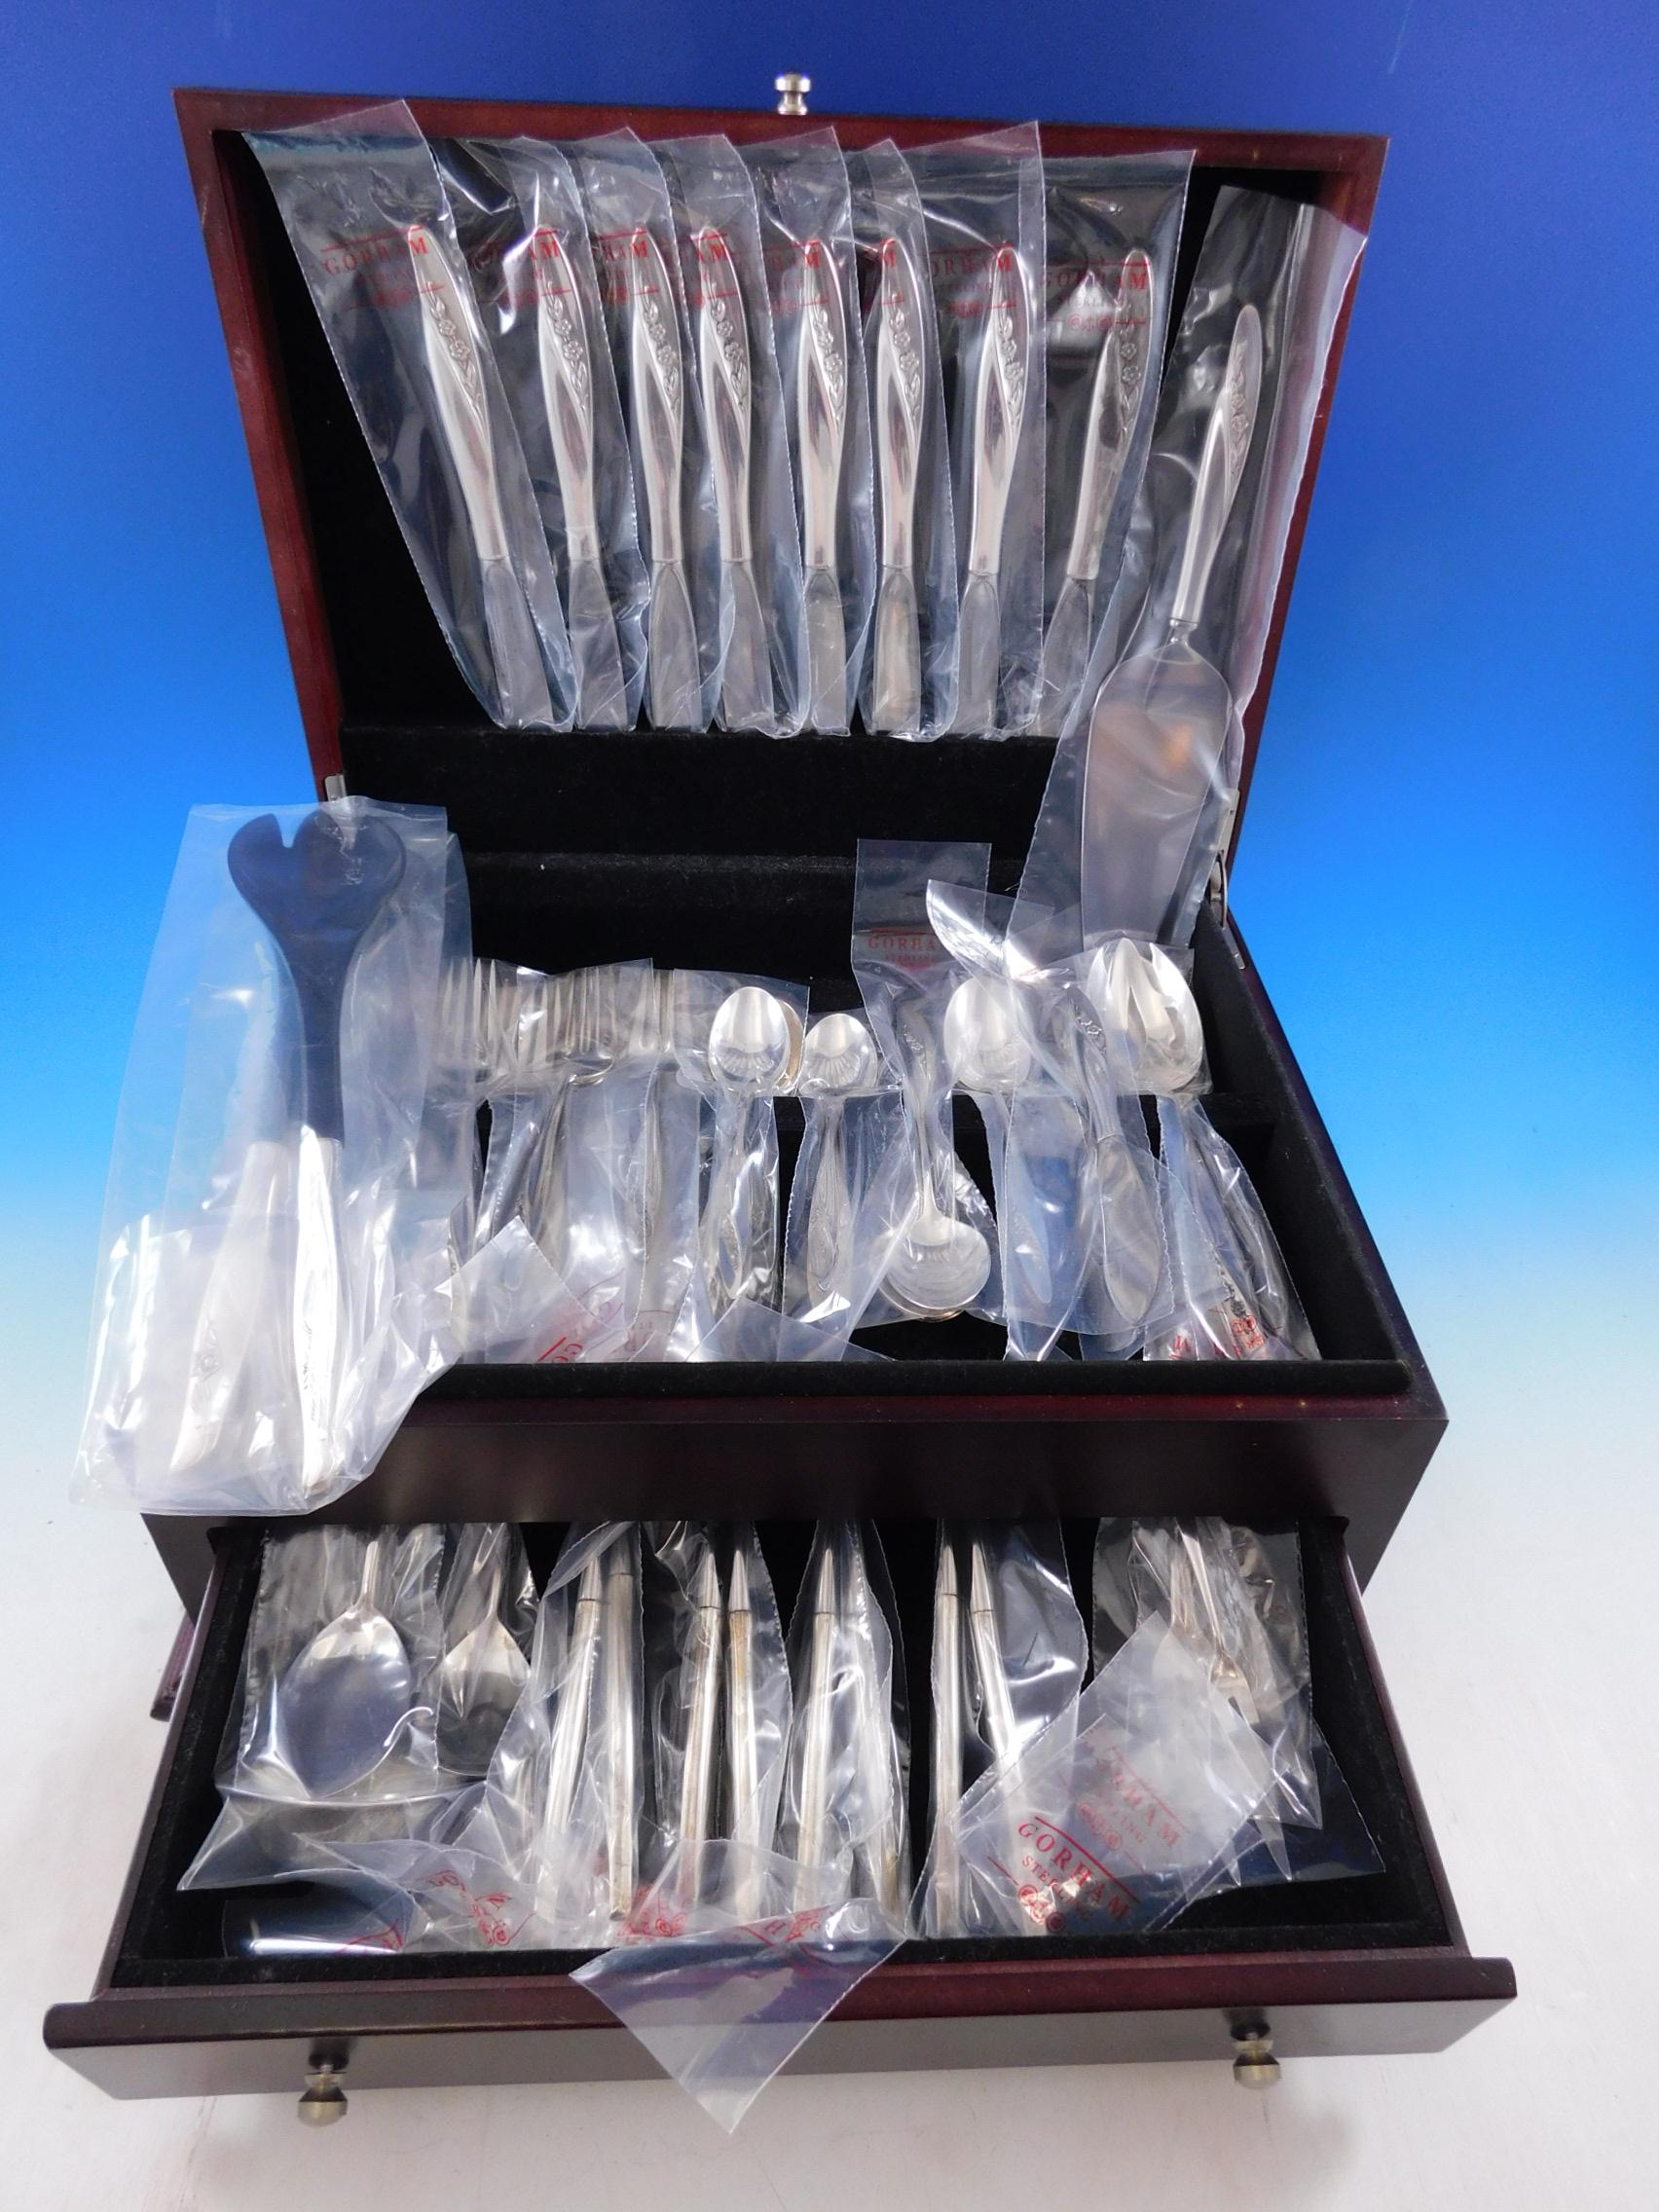 Unused Blithe Spirit by Gorham Sterling Silver Flatware set - 61 pieces. This set includes:


8 Knives, 9 1/8